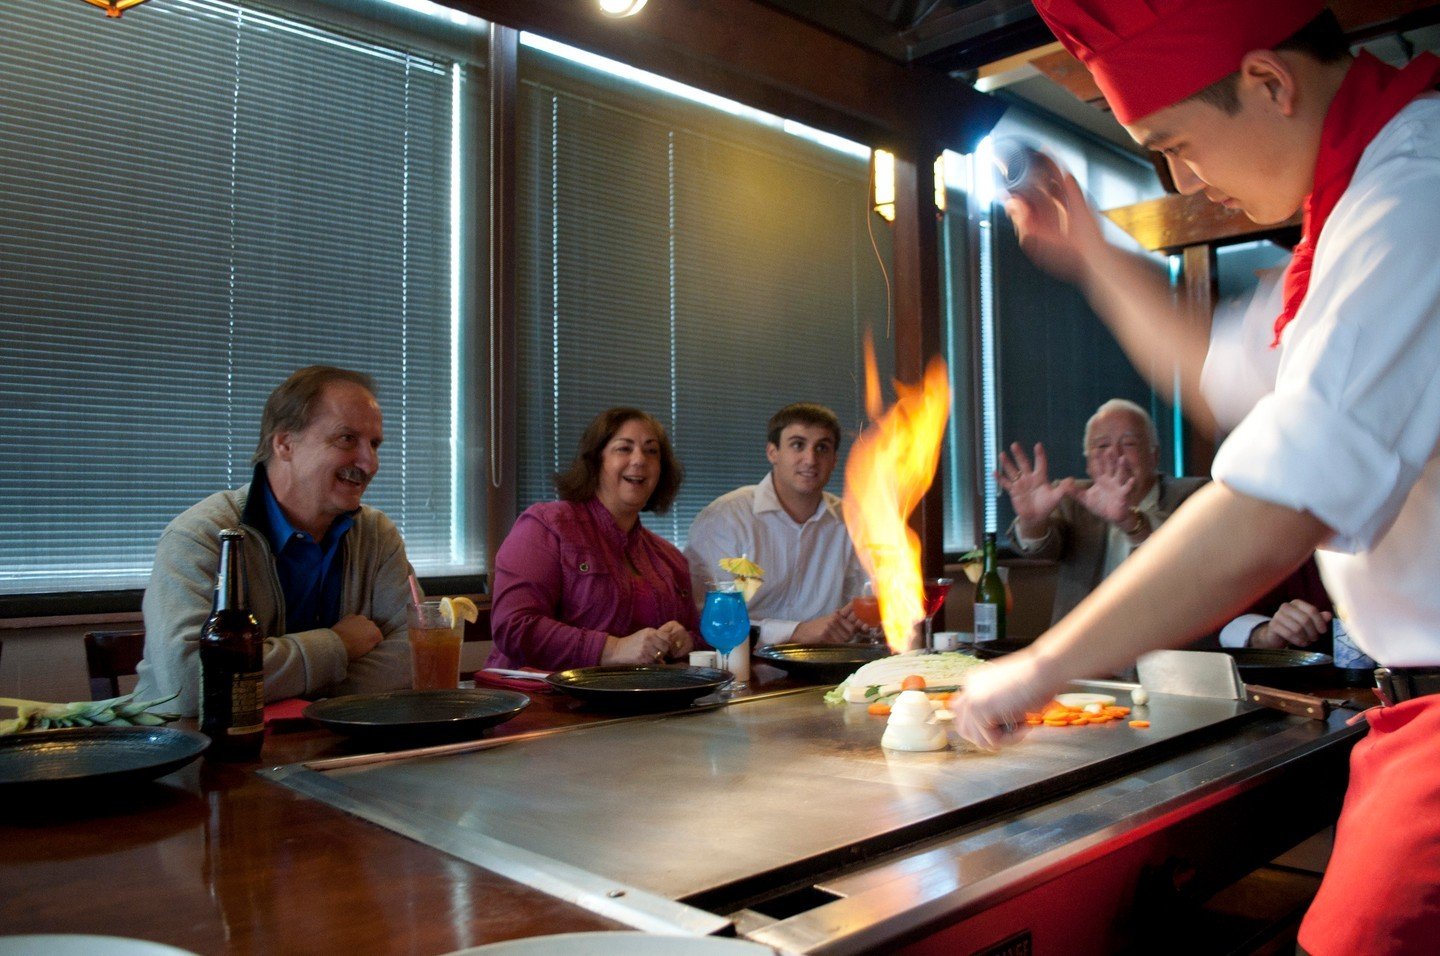 Fresh from the flame, our dishes are sizzling with flavor! 🔥 Experience the thrill of teppanyaki cuisine, hot off the grill, at Hana Japan.

Visit HanaJapan.com to view our menu.